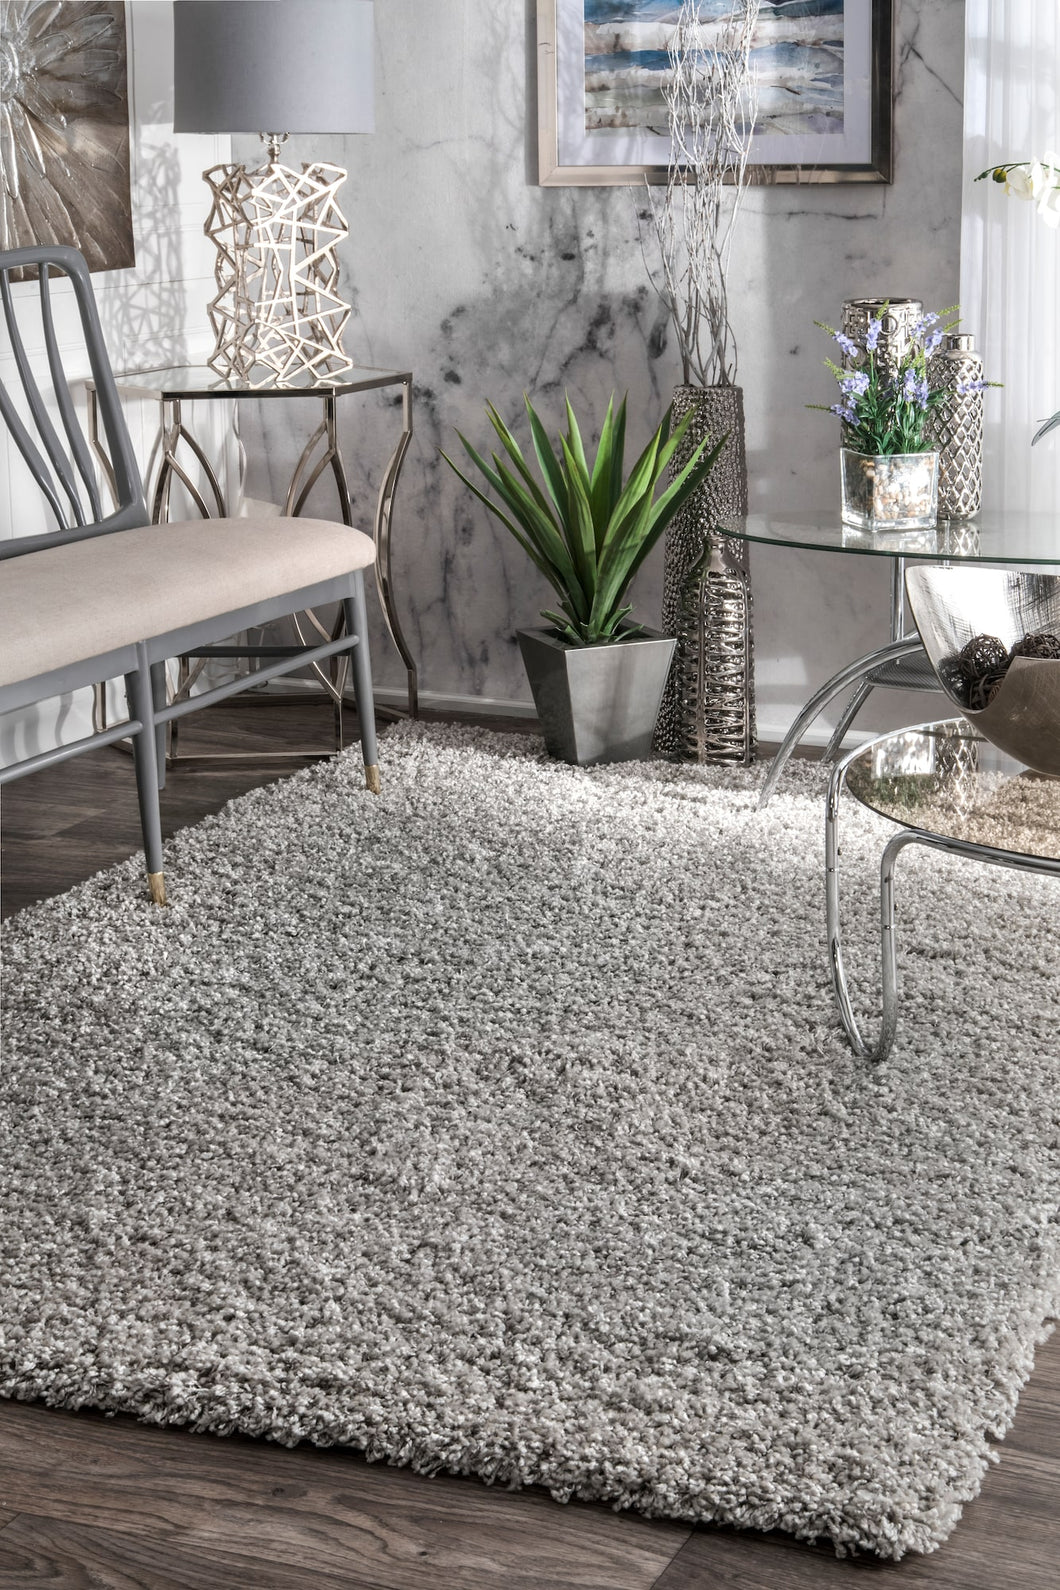 Comforting Office Rug in Silver Plush Shag